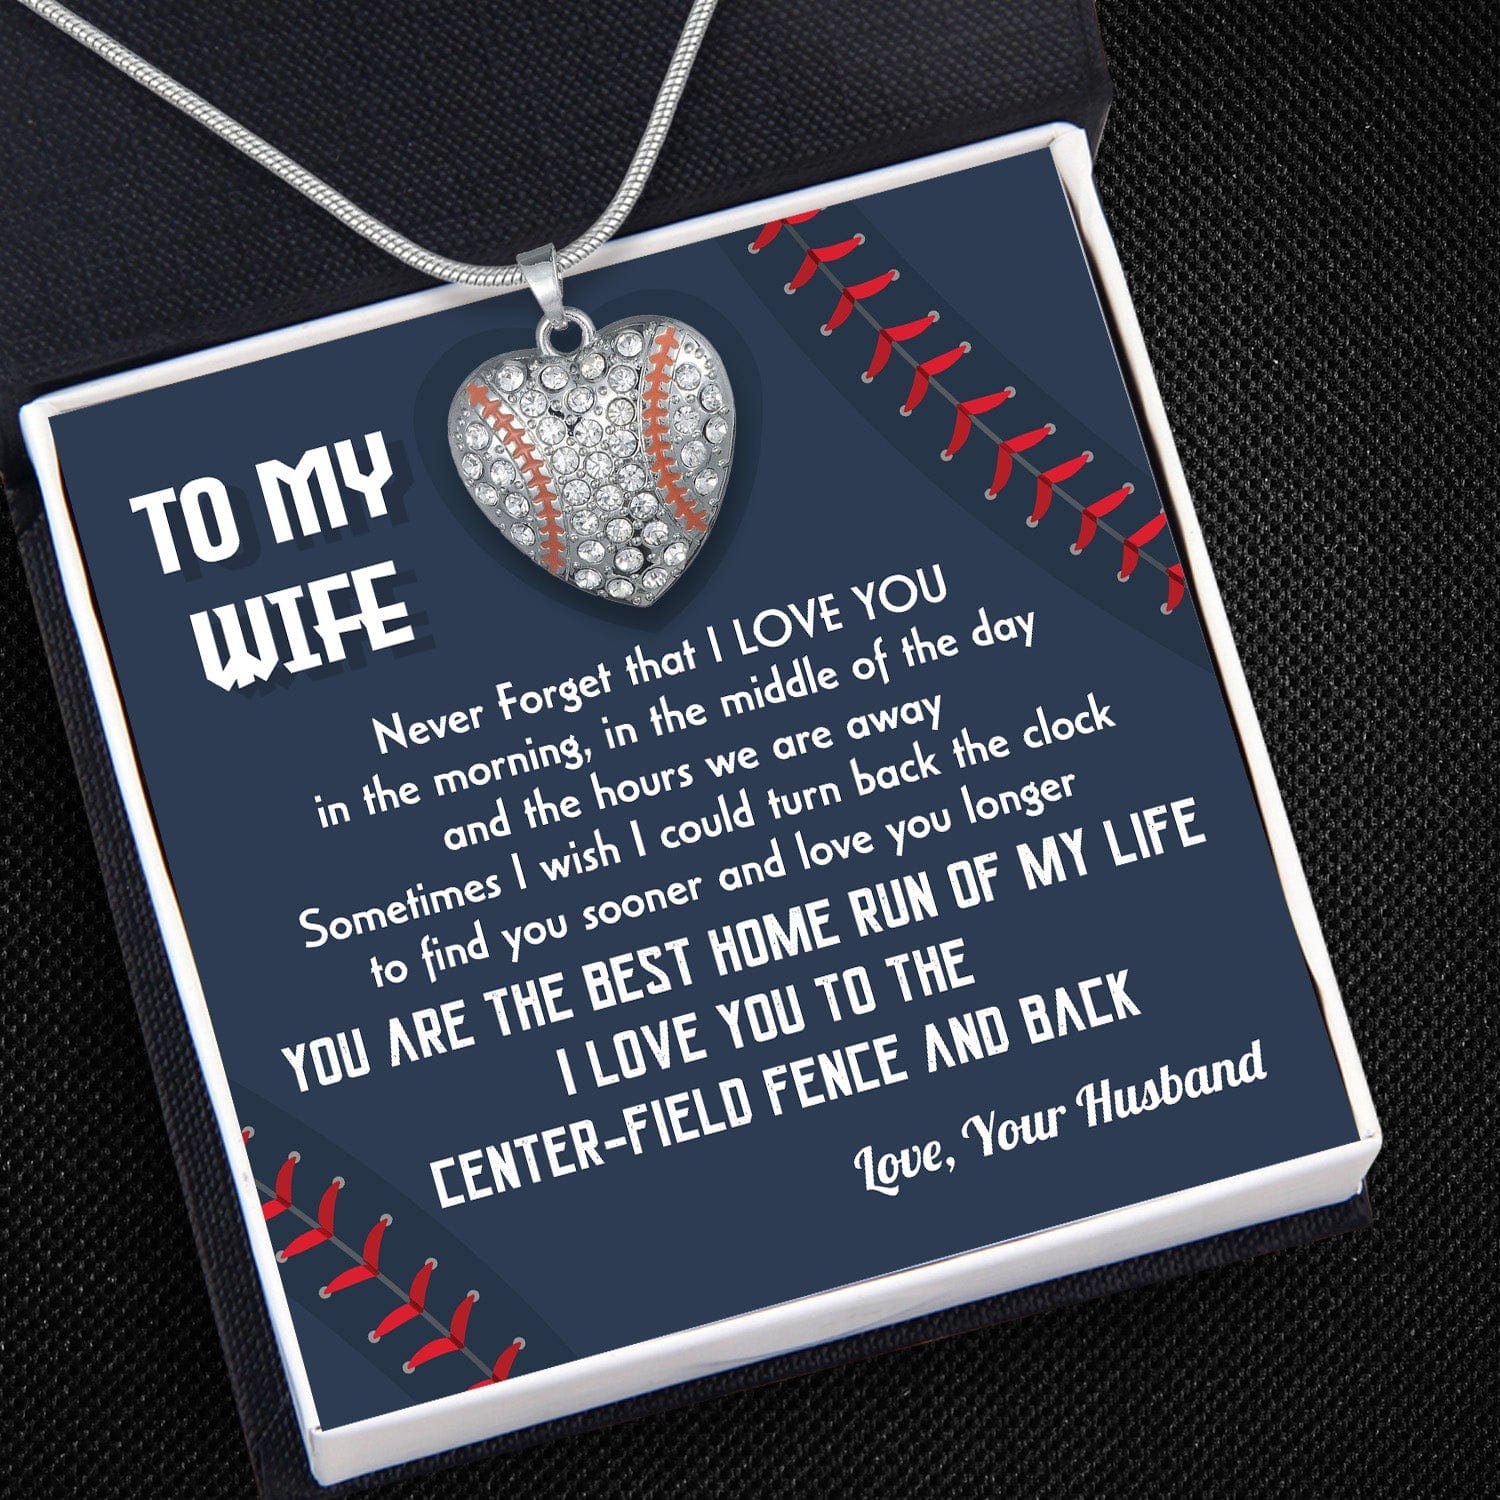 Baseball Heart Necklace - Baseball - To My Wife - You Are The Best Home Run Of My Life - Gnd15019